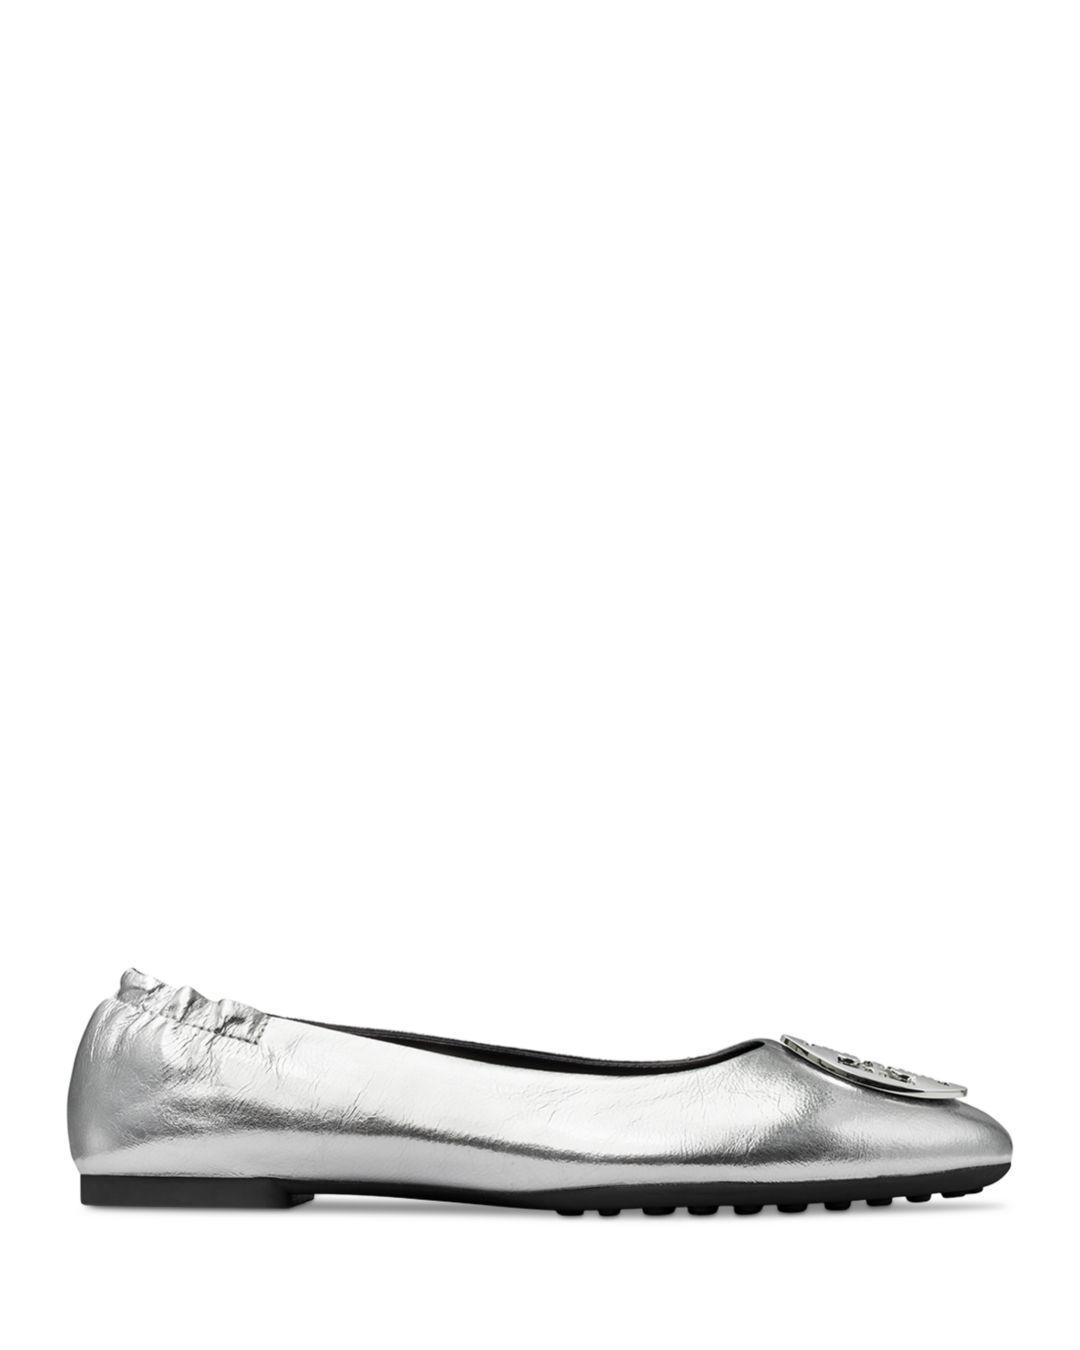 Tory Burch Claire Ballet Flats in White | Lyst